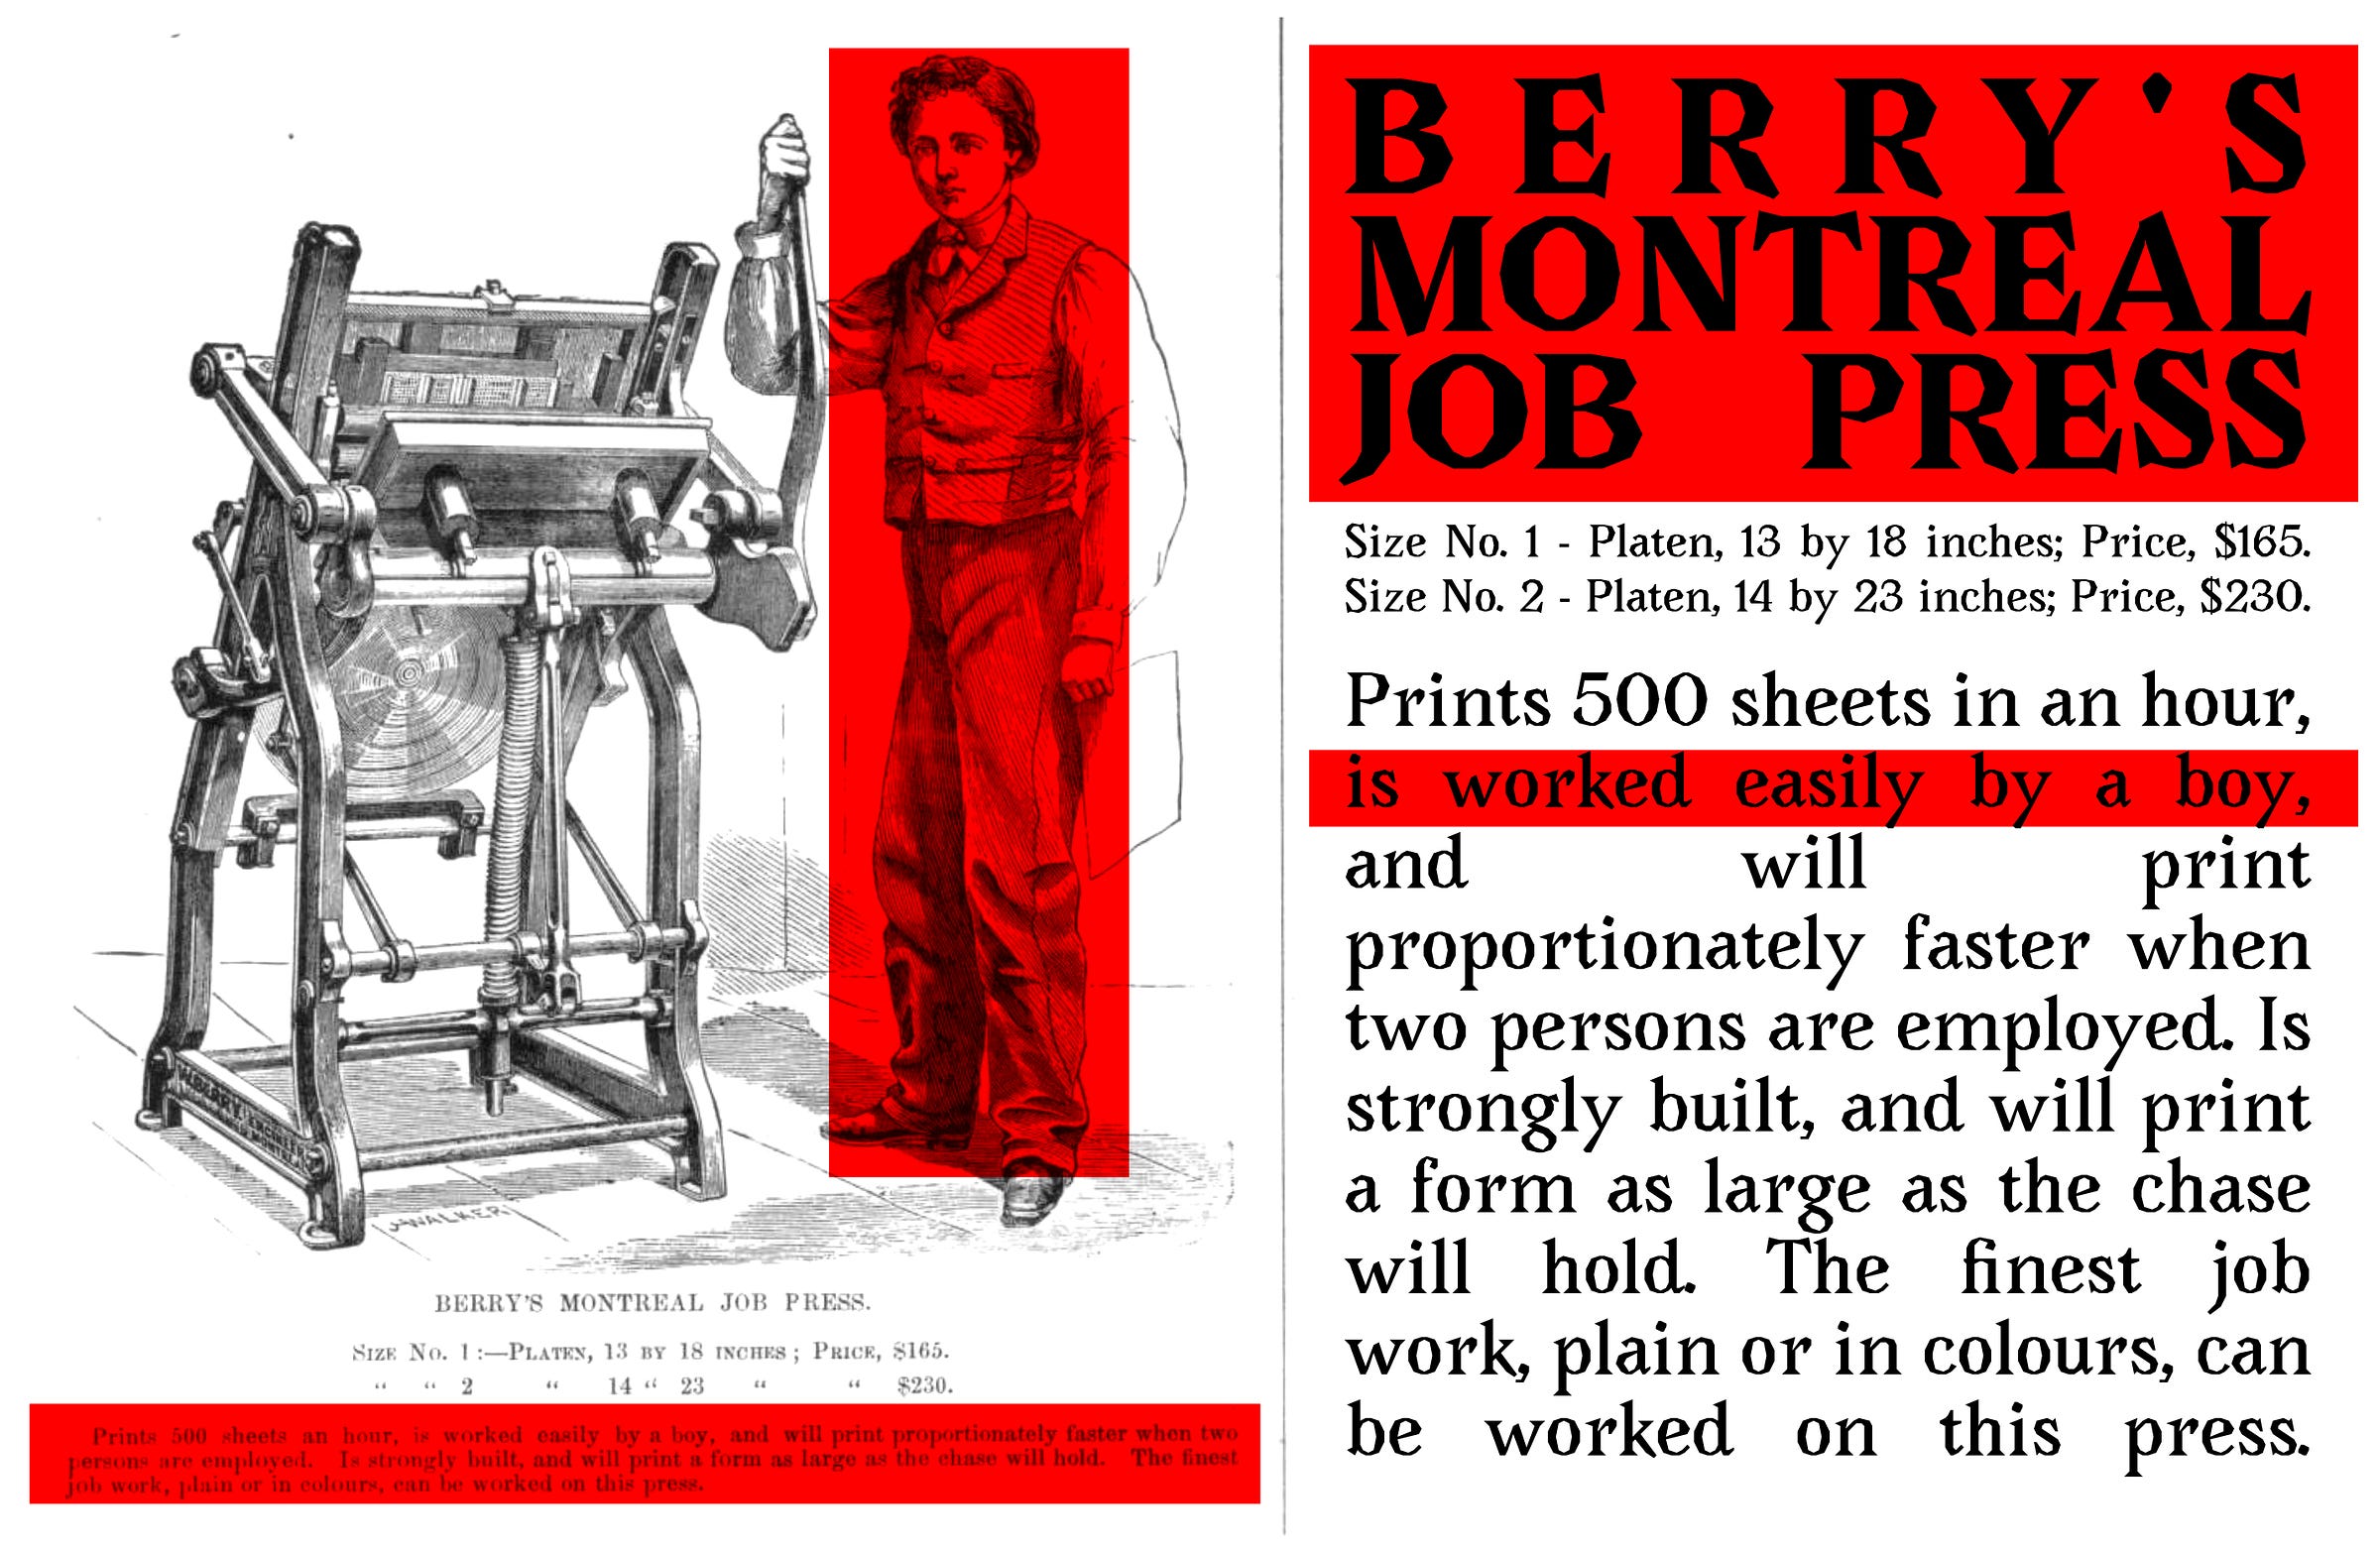 Old style illustration of a boy standing at a printing press. The caption has been copied larger next to the image. The name of the press, the boy, and the line "is worked easily by a boy" are highlighted in red. The full caption reads: "BERRY'S MONTREAL JOB PRESS Size No. 1 - Platen, 13 by 18 inches; Price, $165. Size No. 2 - Platen, 14 by 23 inches; Price, $230. Prints 500 sheets in an hour, is worked easily by a boy, and will print proportionately faster when two persons are employed. Is strongly built, and will print a form as large as the chase will hold. The finest job work, plain or in colours, can be worked on this press."